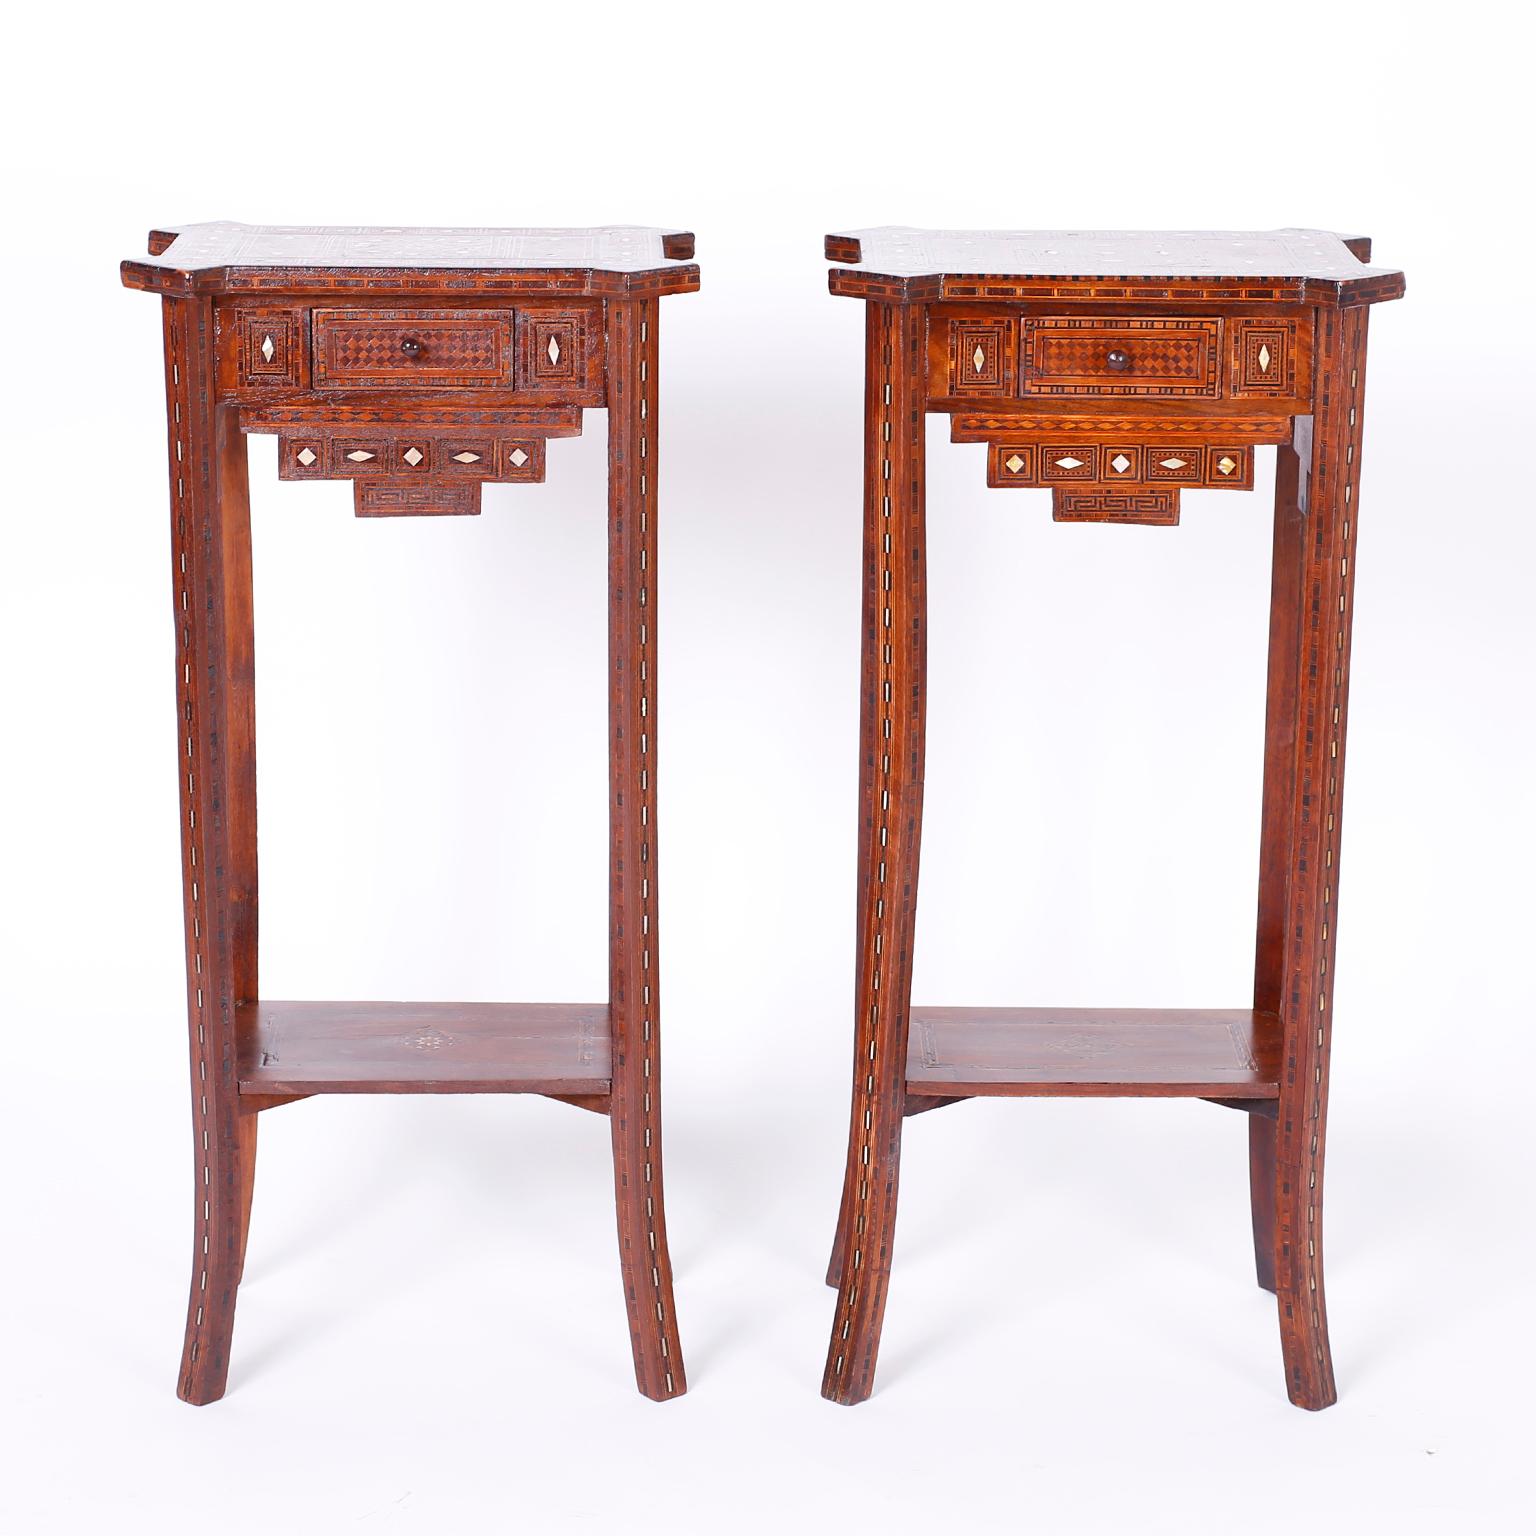 Refined pair of Syrian one drawer tables or stands with a tall, elegant form crafted in walnut and inlaid from top to bottom with geometric designs using mother of pearl, mahogany, ebony, and king wood featuring splayed legs and a desirable slim